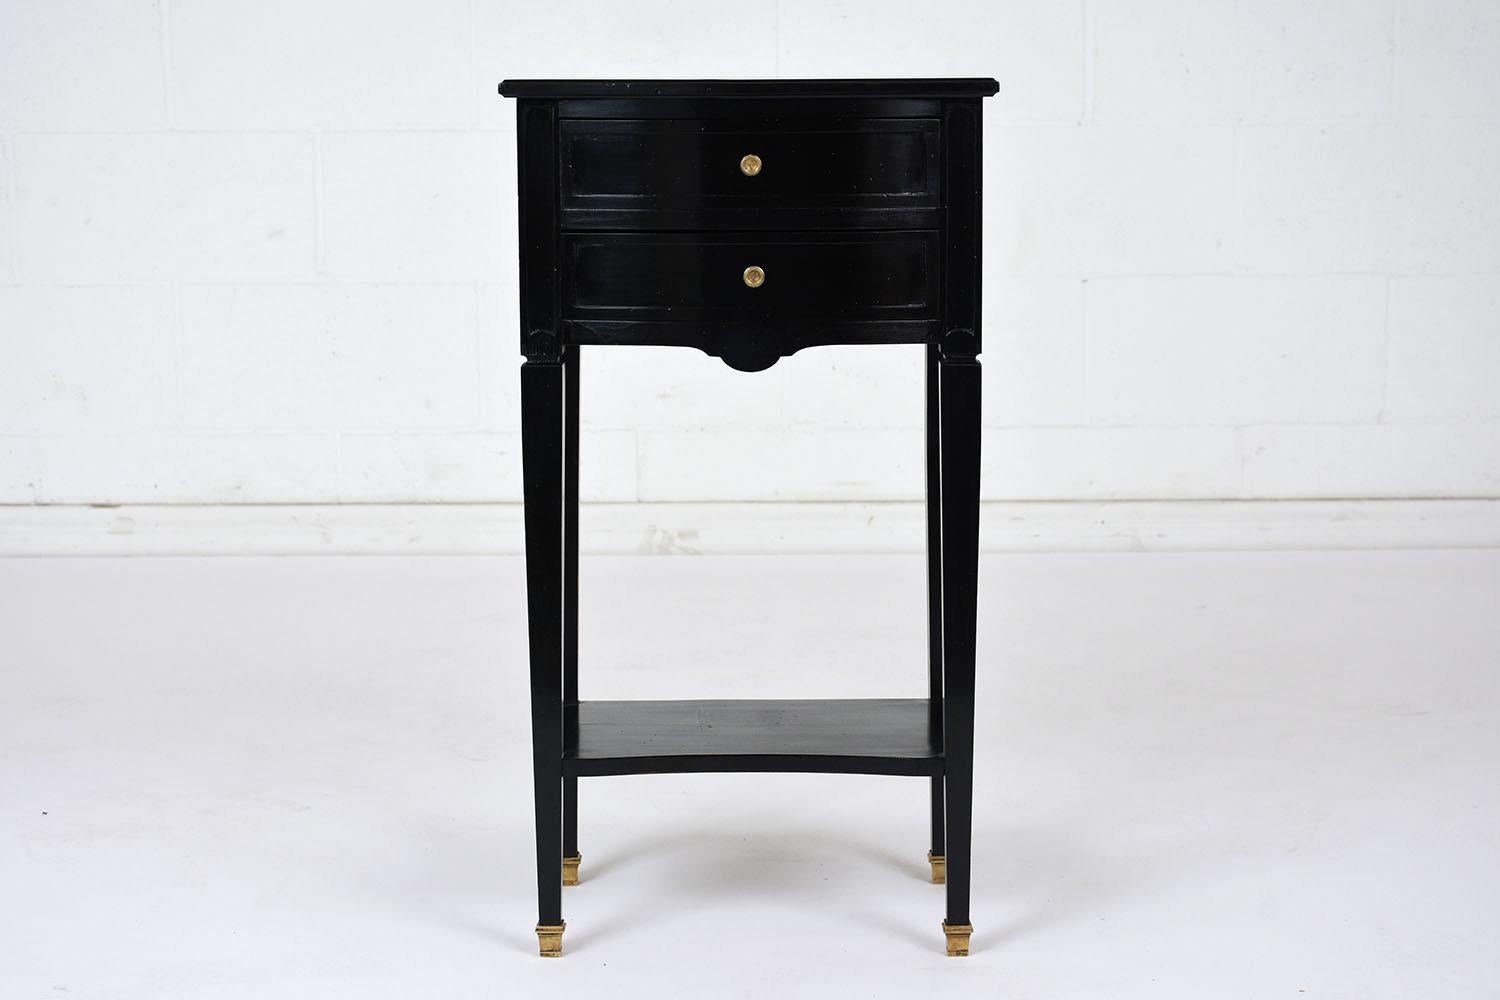 This 1970s Louis XVI style nightstand is made of mahogany wood with an ebonized and lacquered finish. The nightstand has two drawers with curved fronts and simple brass drawer pulls. Stabilizing the tape1ed legs is an open shelf for extra storage.